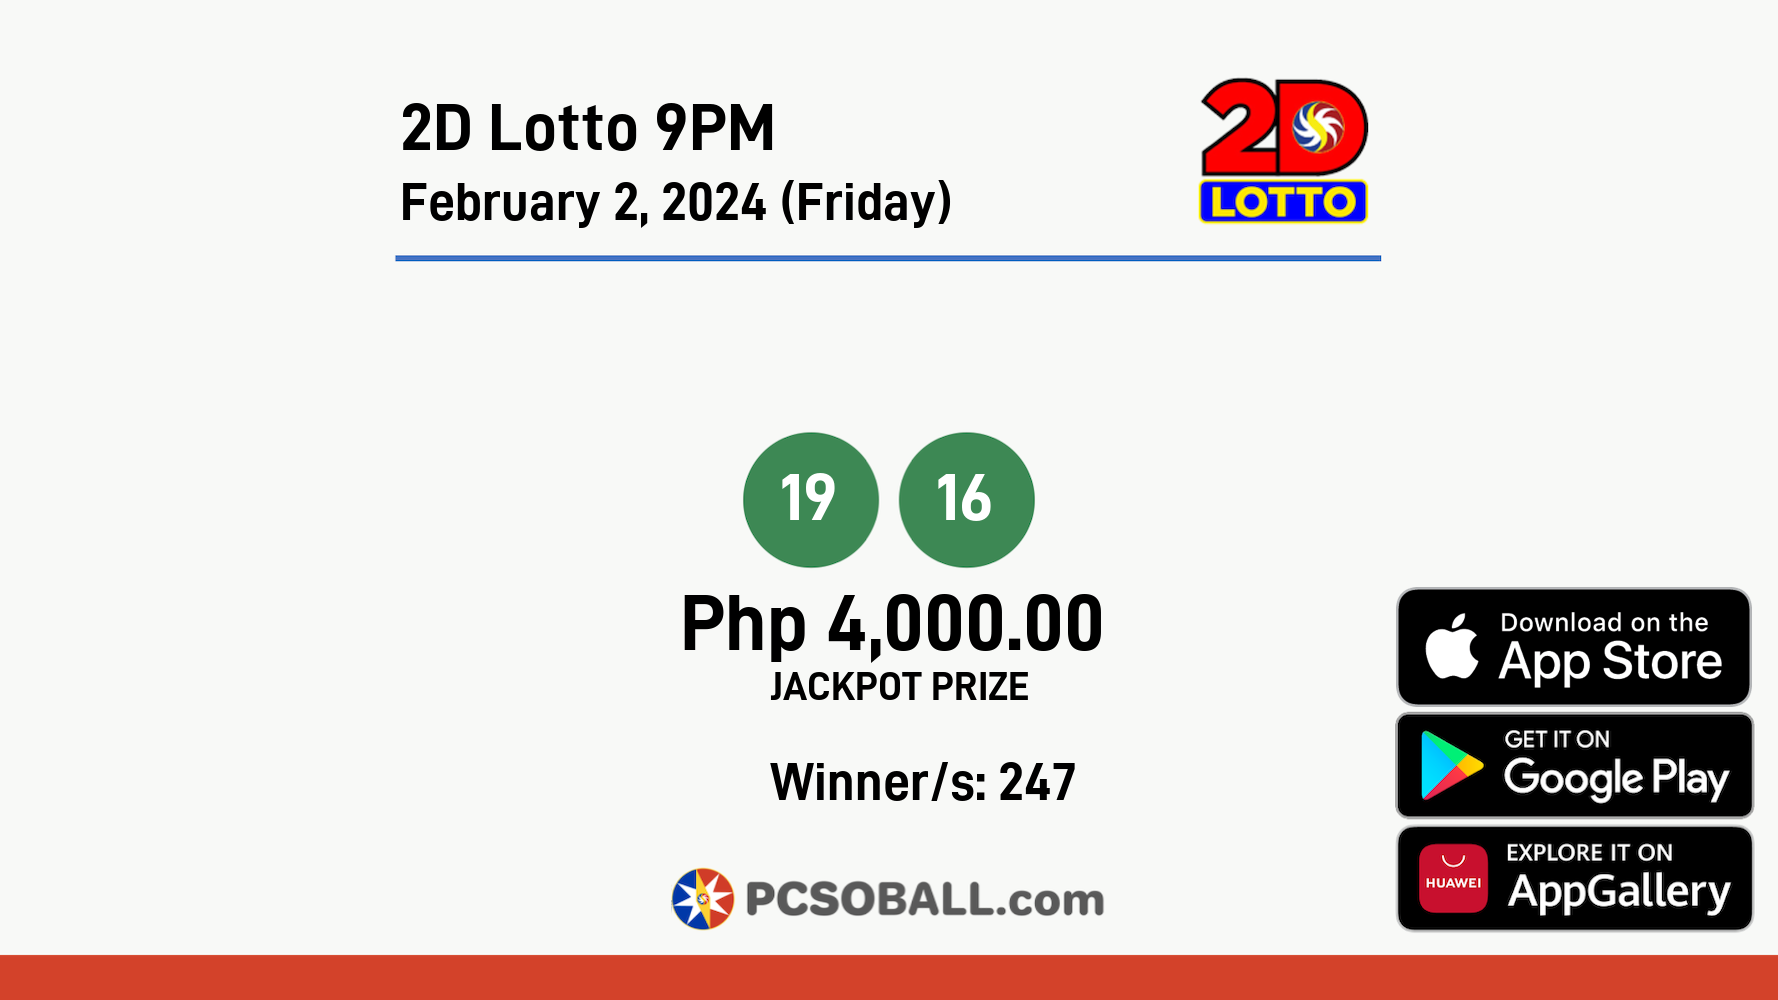 2D Lotto 9PM February 2, 2024 (Friday) Result